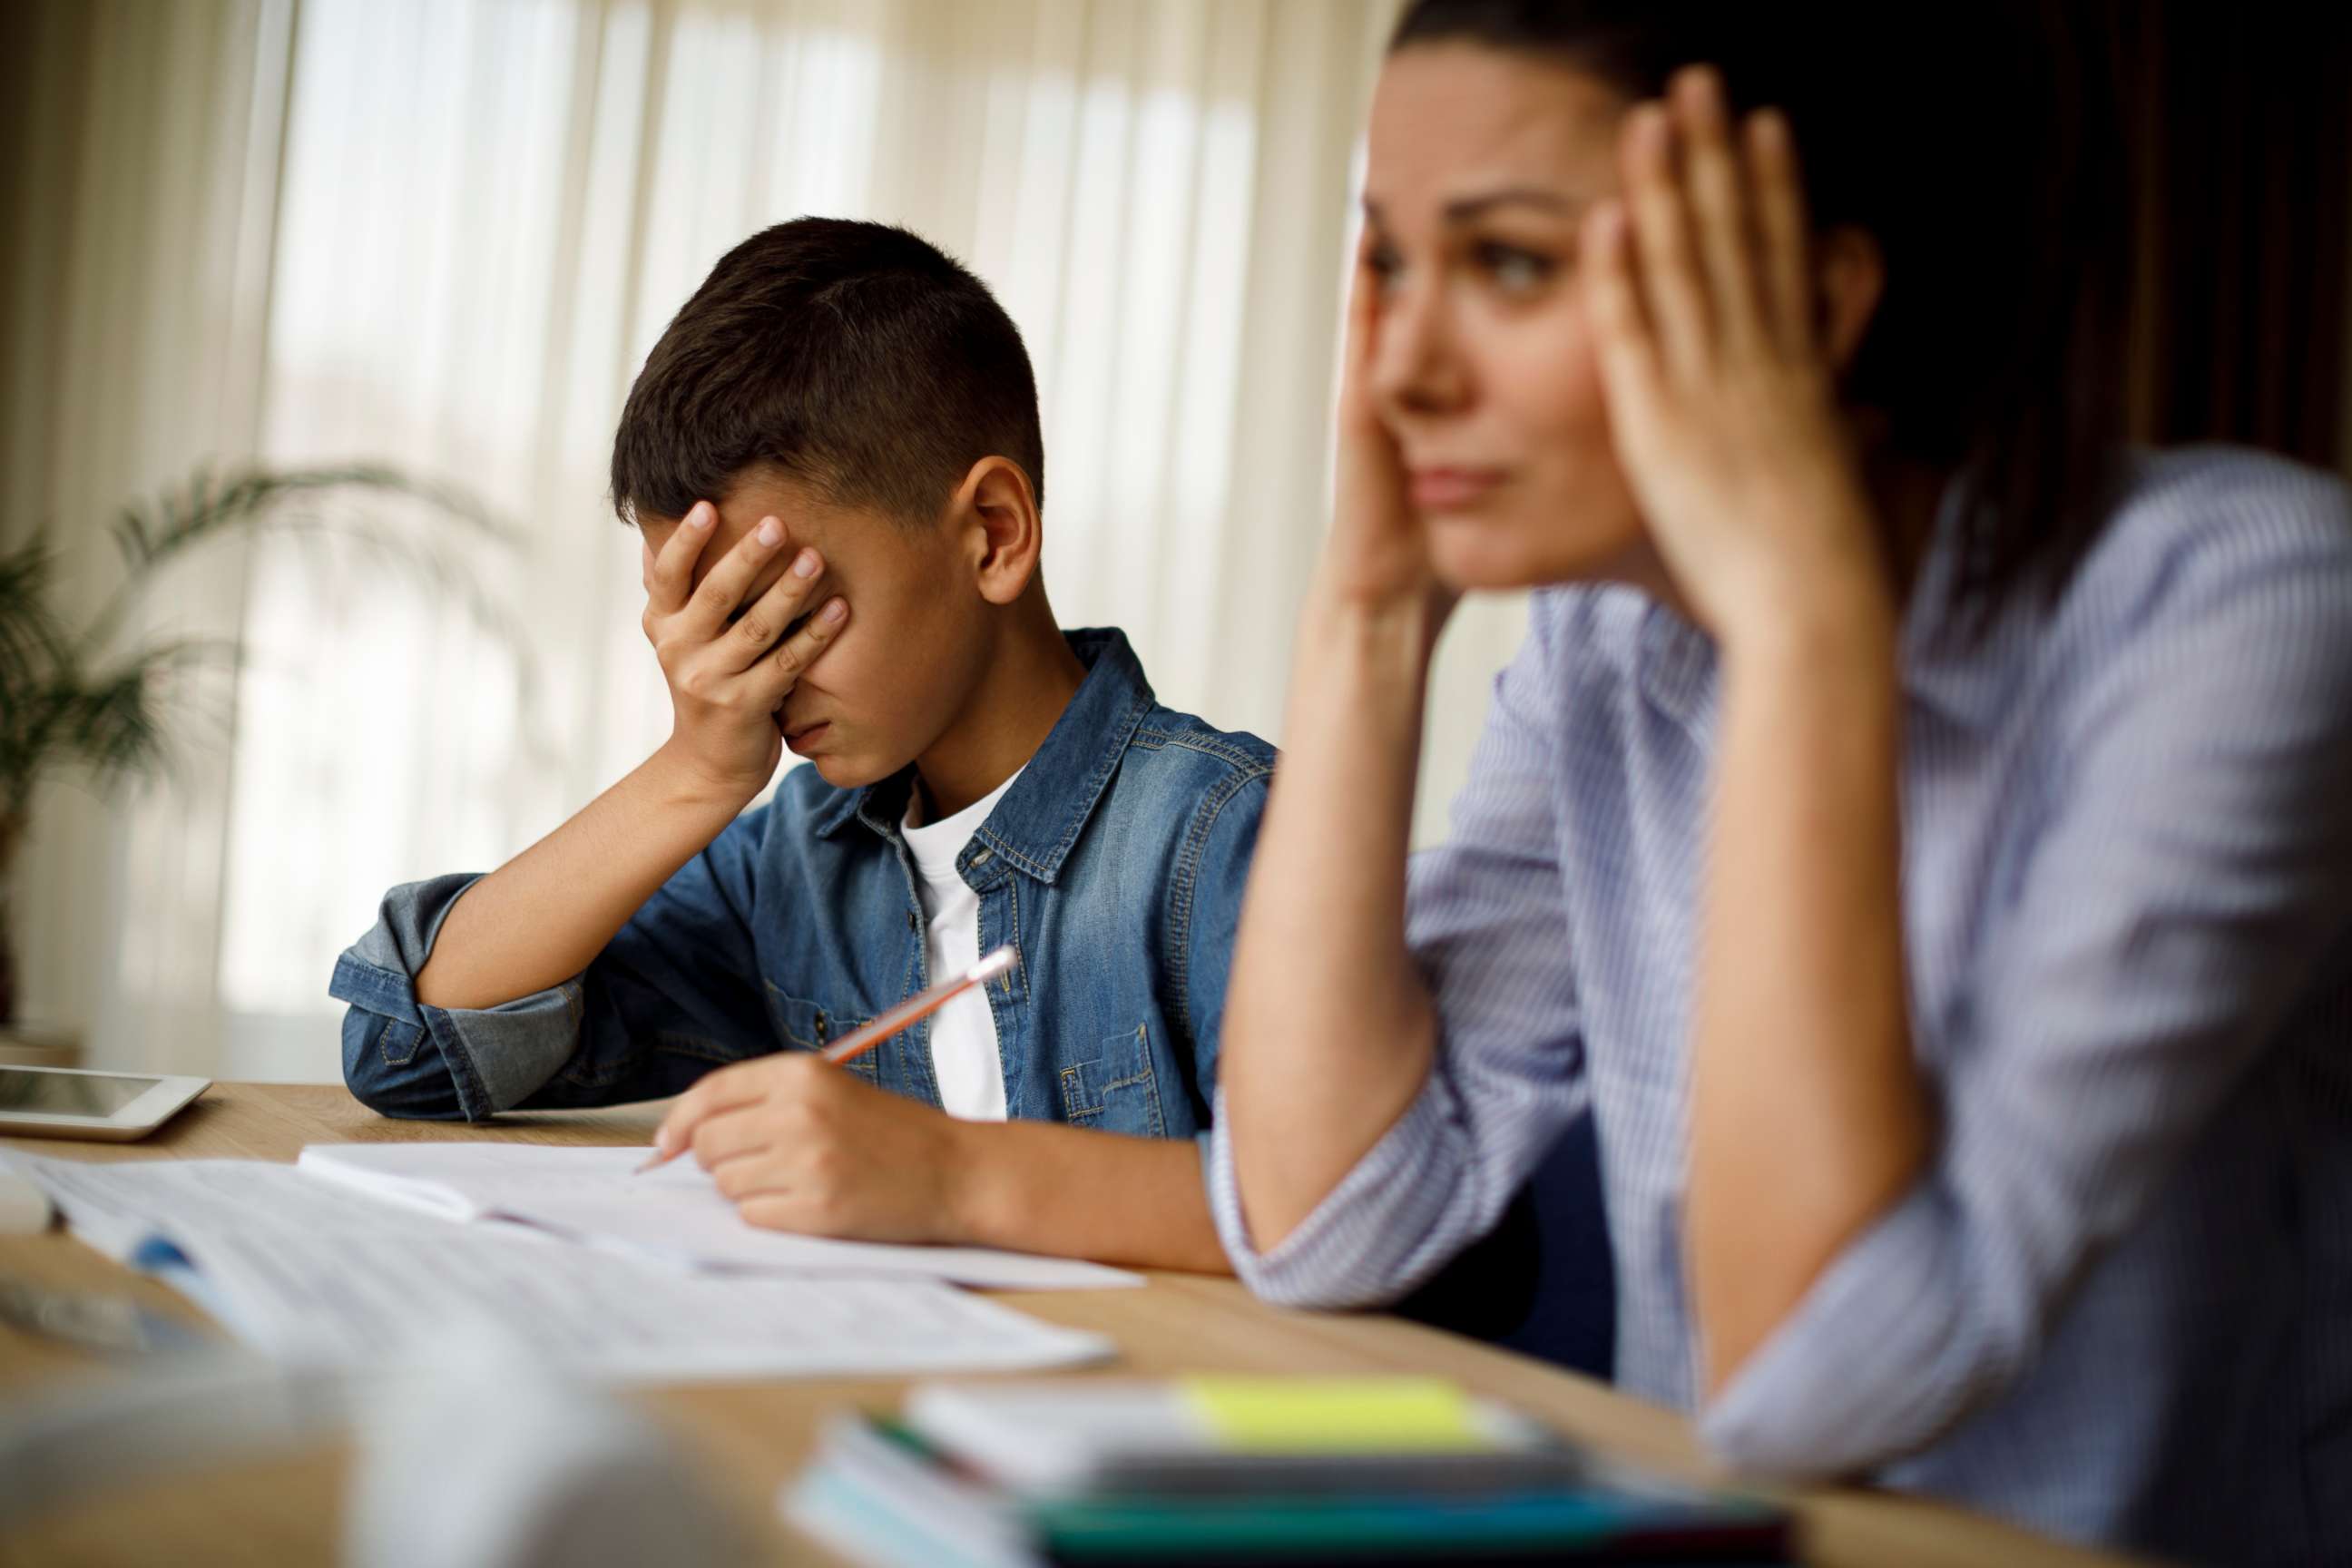 PHOTO: An undated stock photo depicts a stressed mother and son sitting at a table.